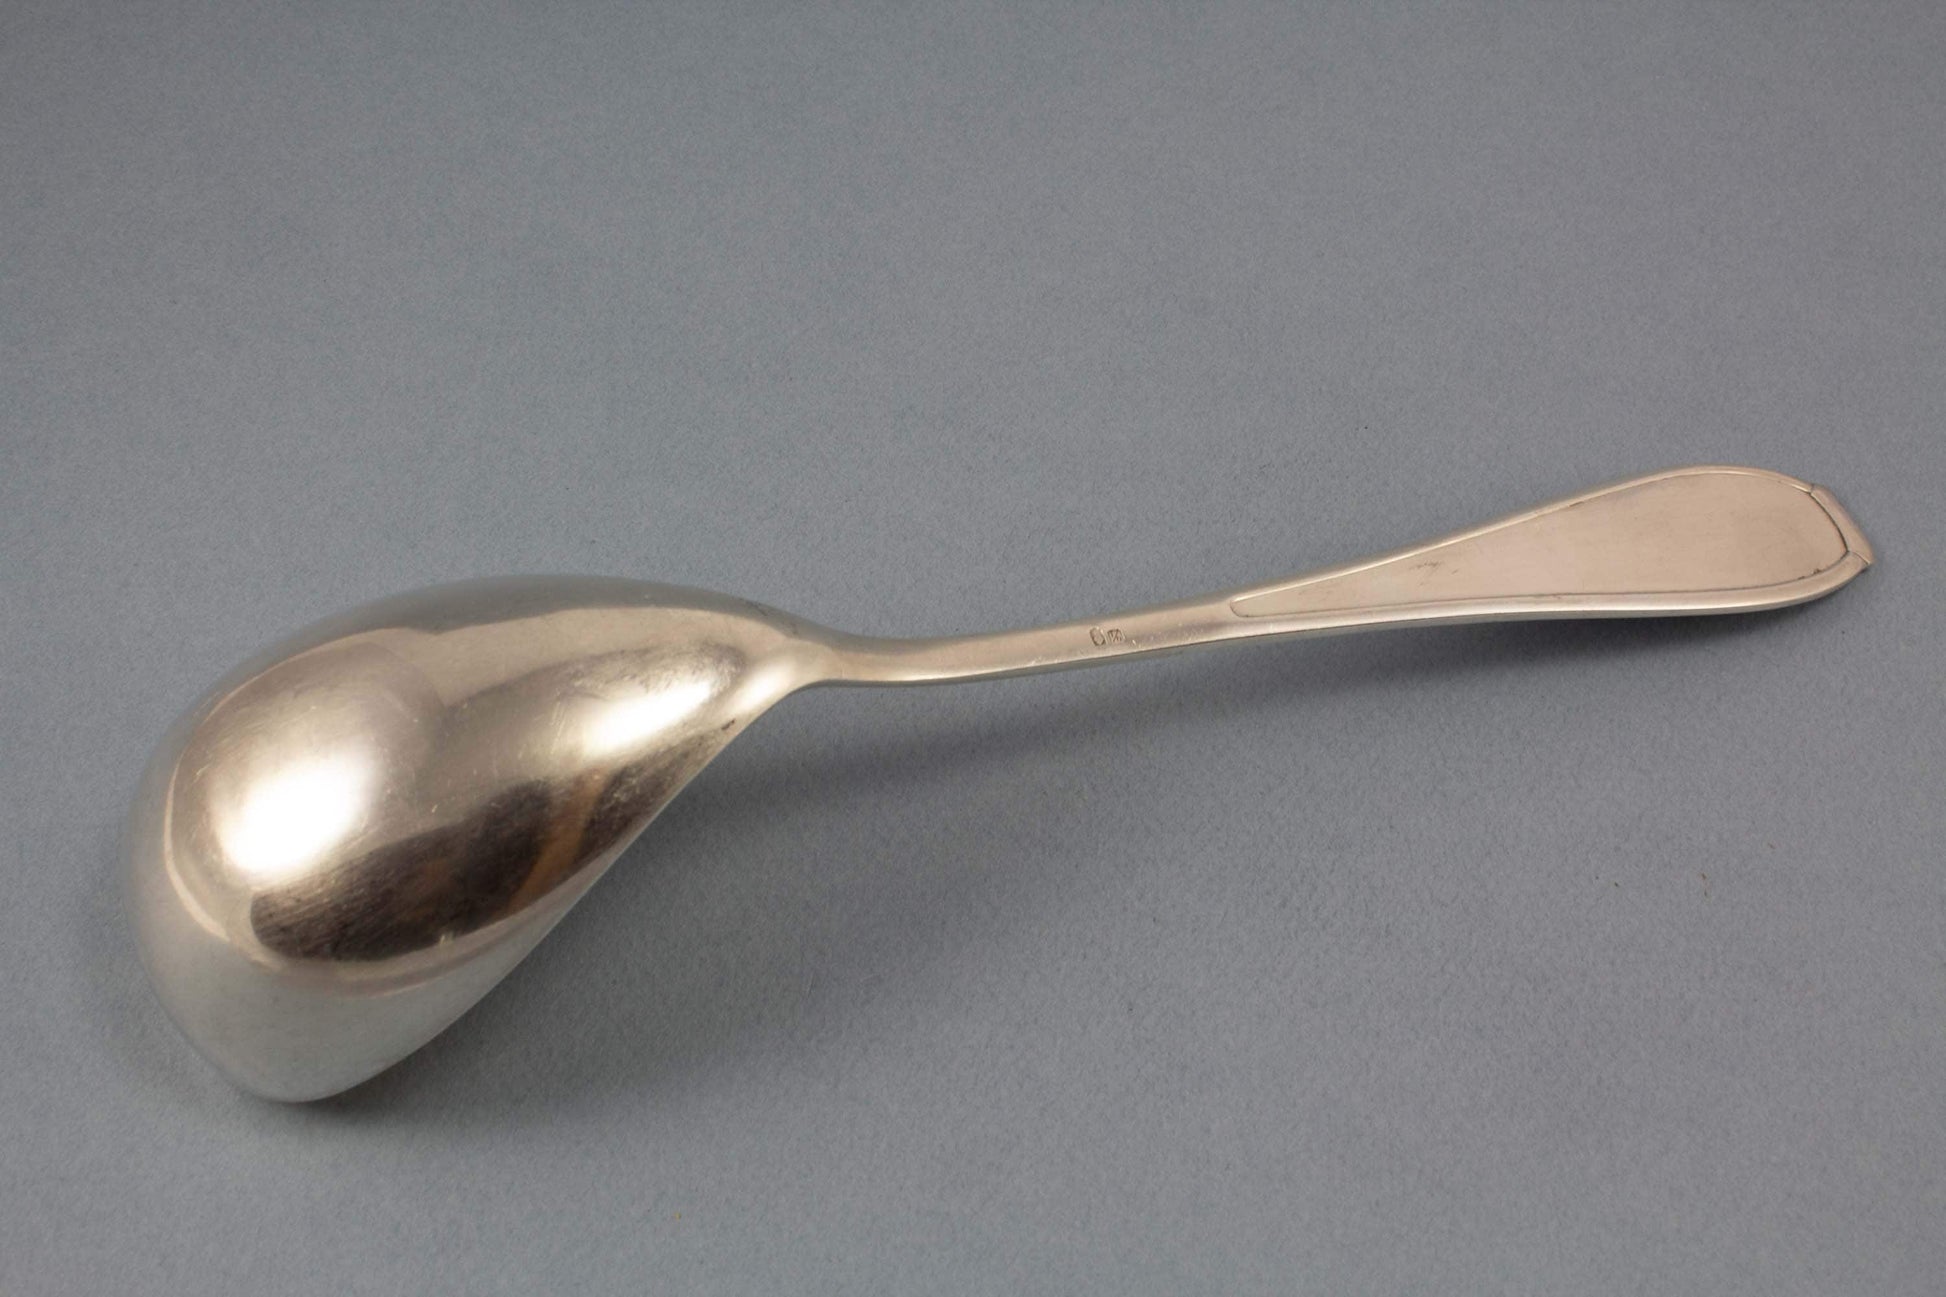 Rare sauce spoon from  WMF, WMF 300, large spoon for sauce